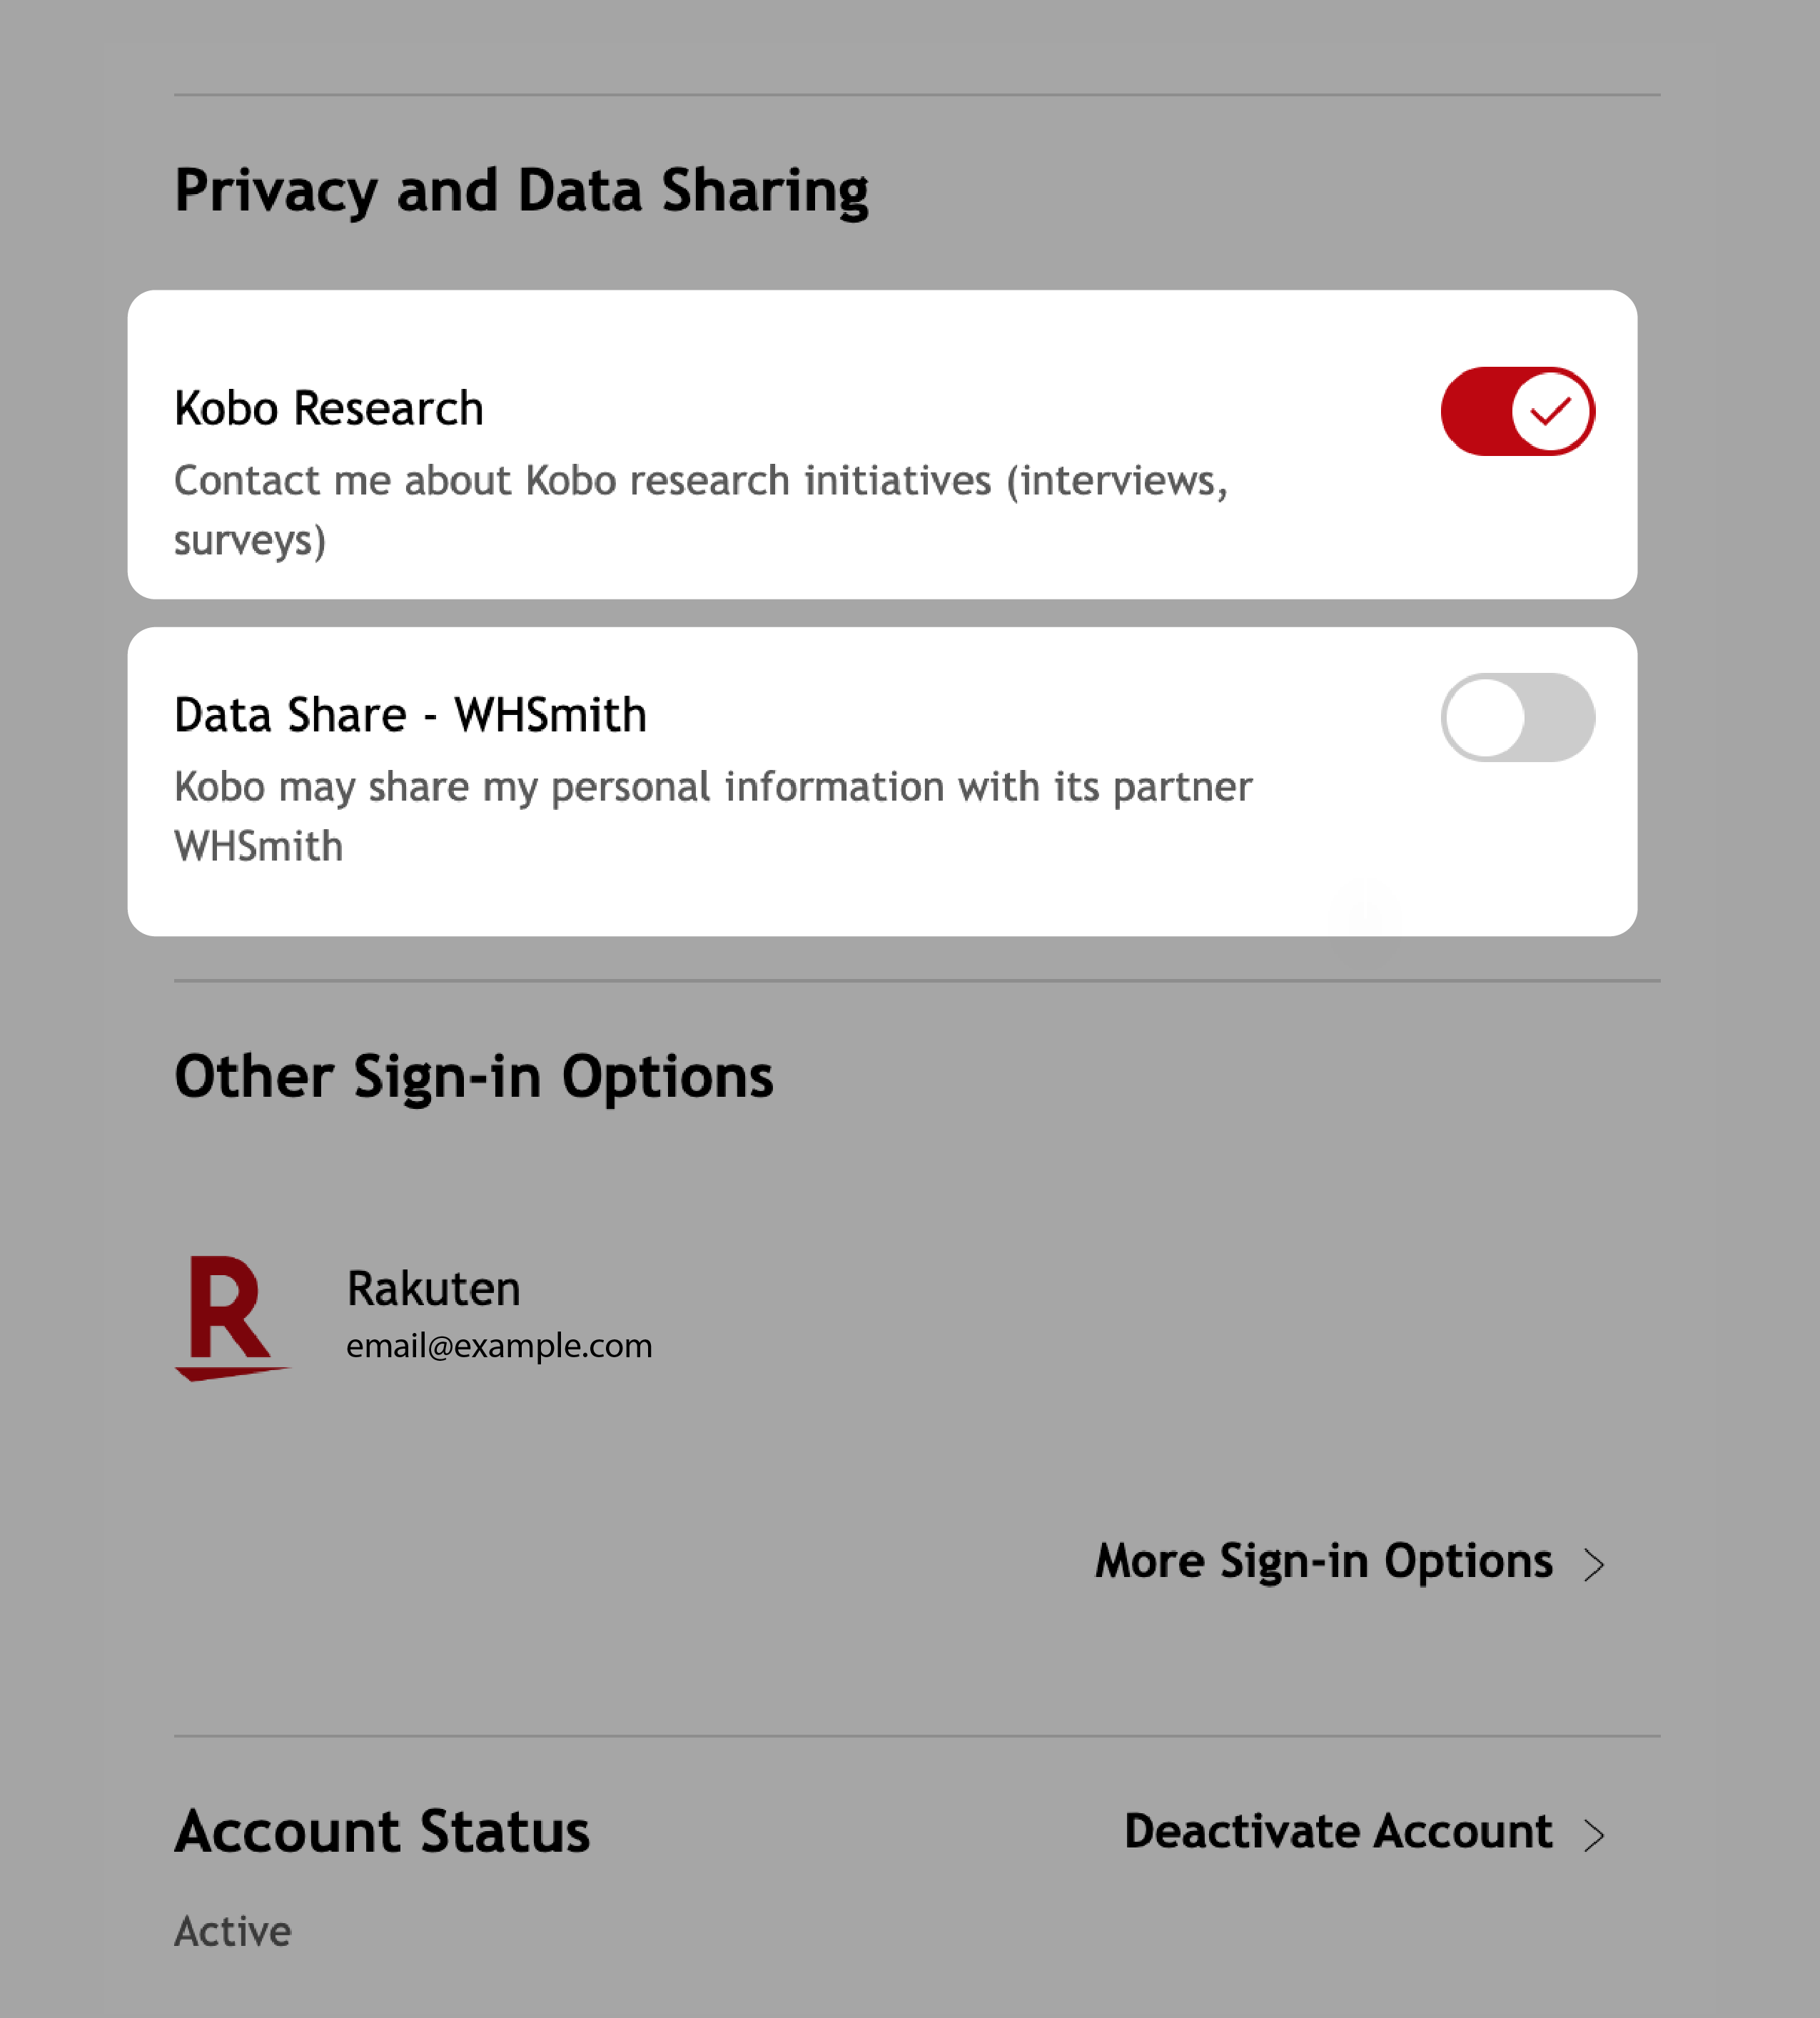 Privacy_and_Data_sharing-01.png